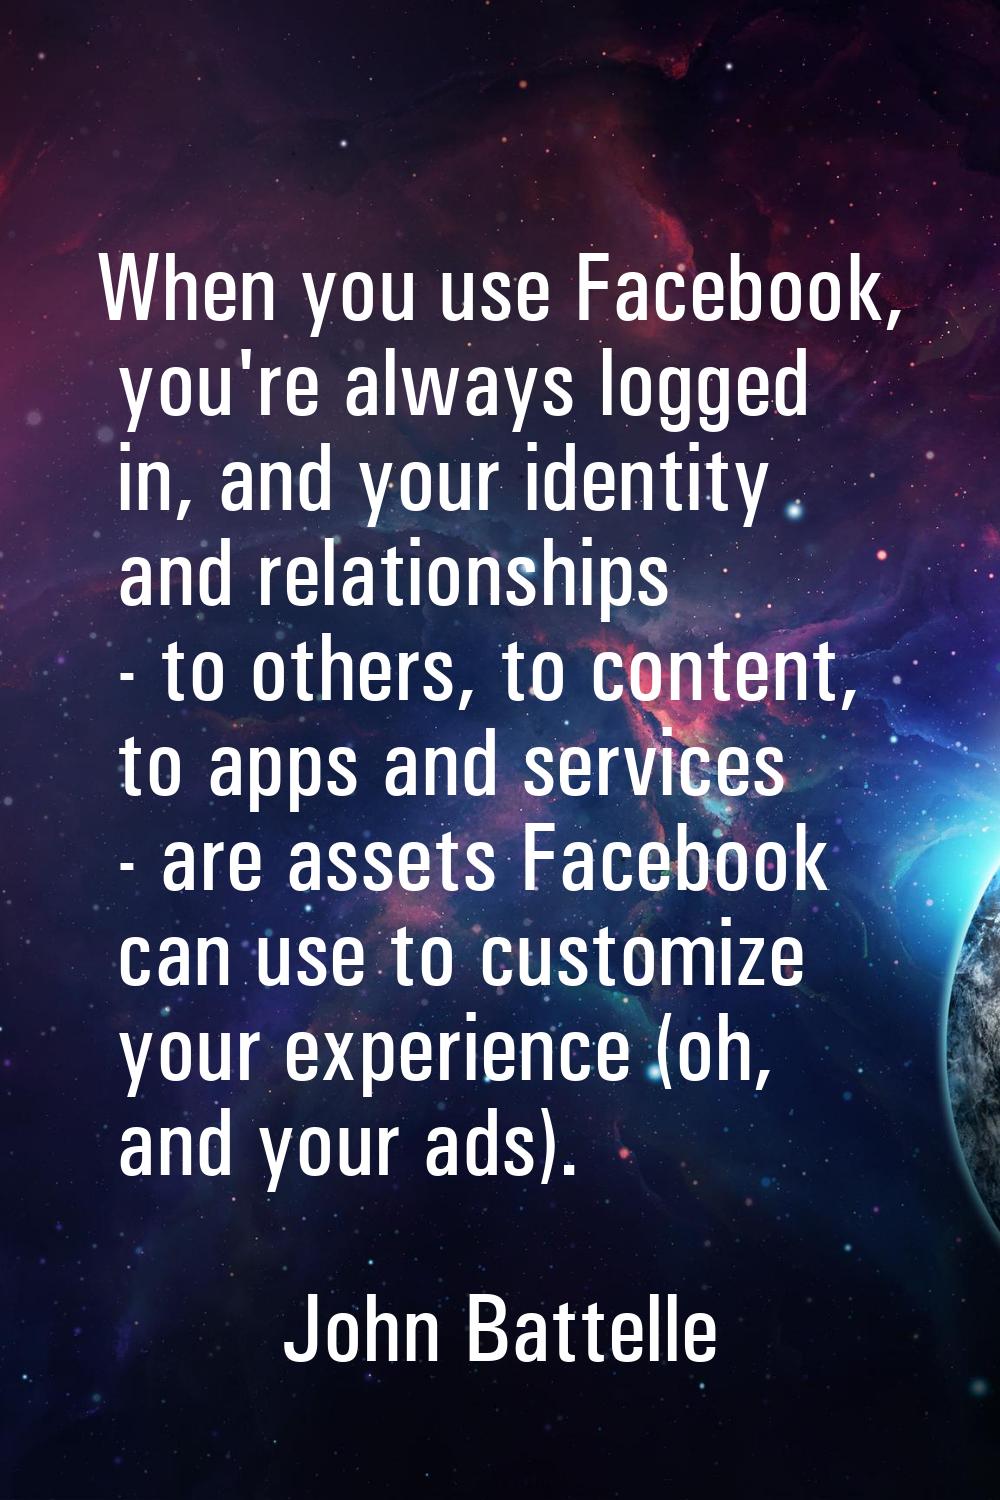 When you use Facebook, you're always logged in, and your identity and relationships - to others, to